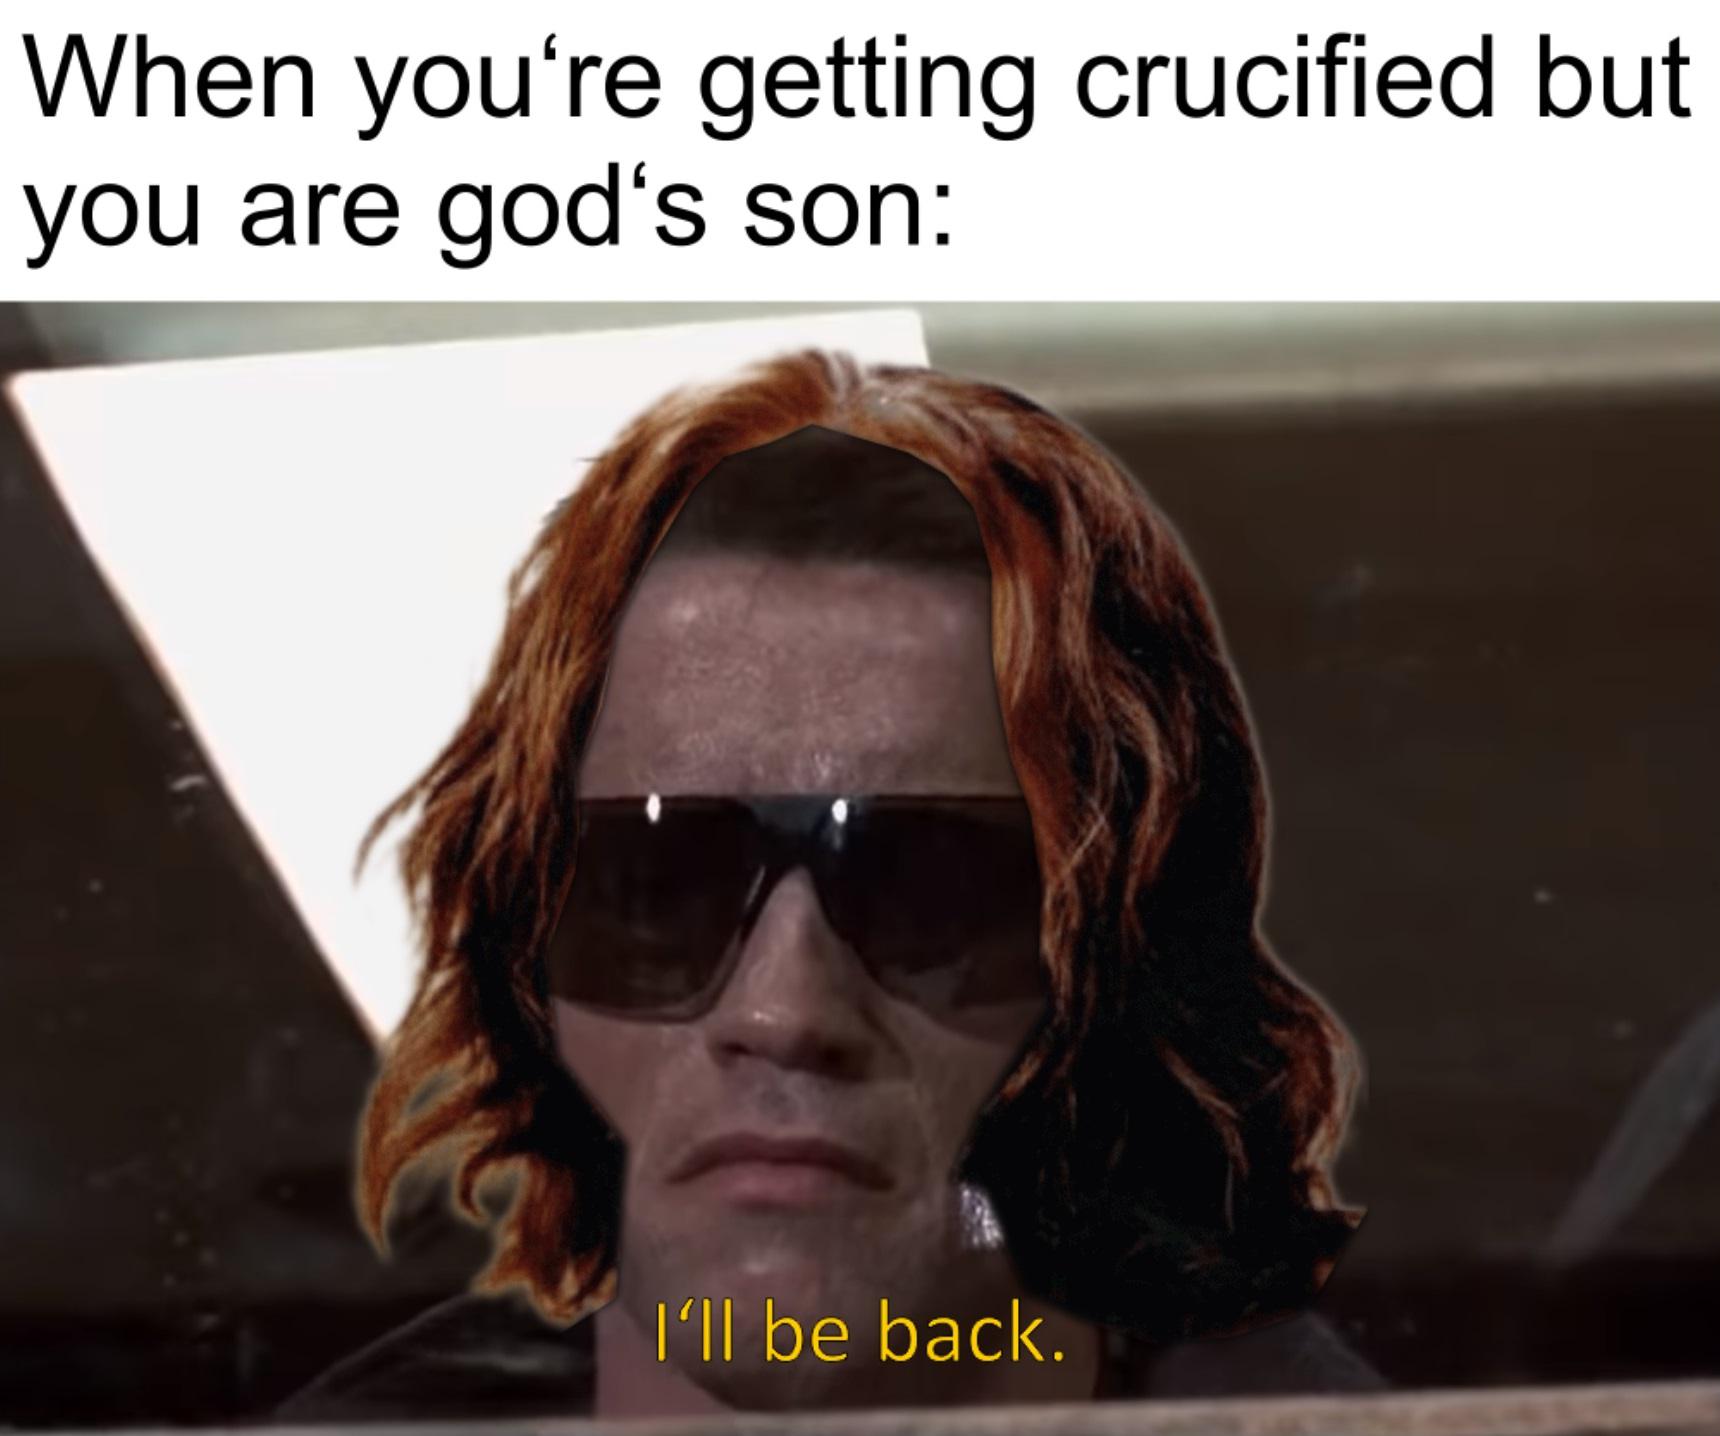 christian christian-memes christian text: When you're getting crucified but you are god's son: I'll be bacl<. 